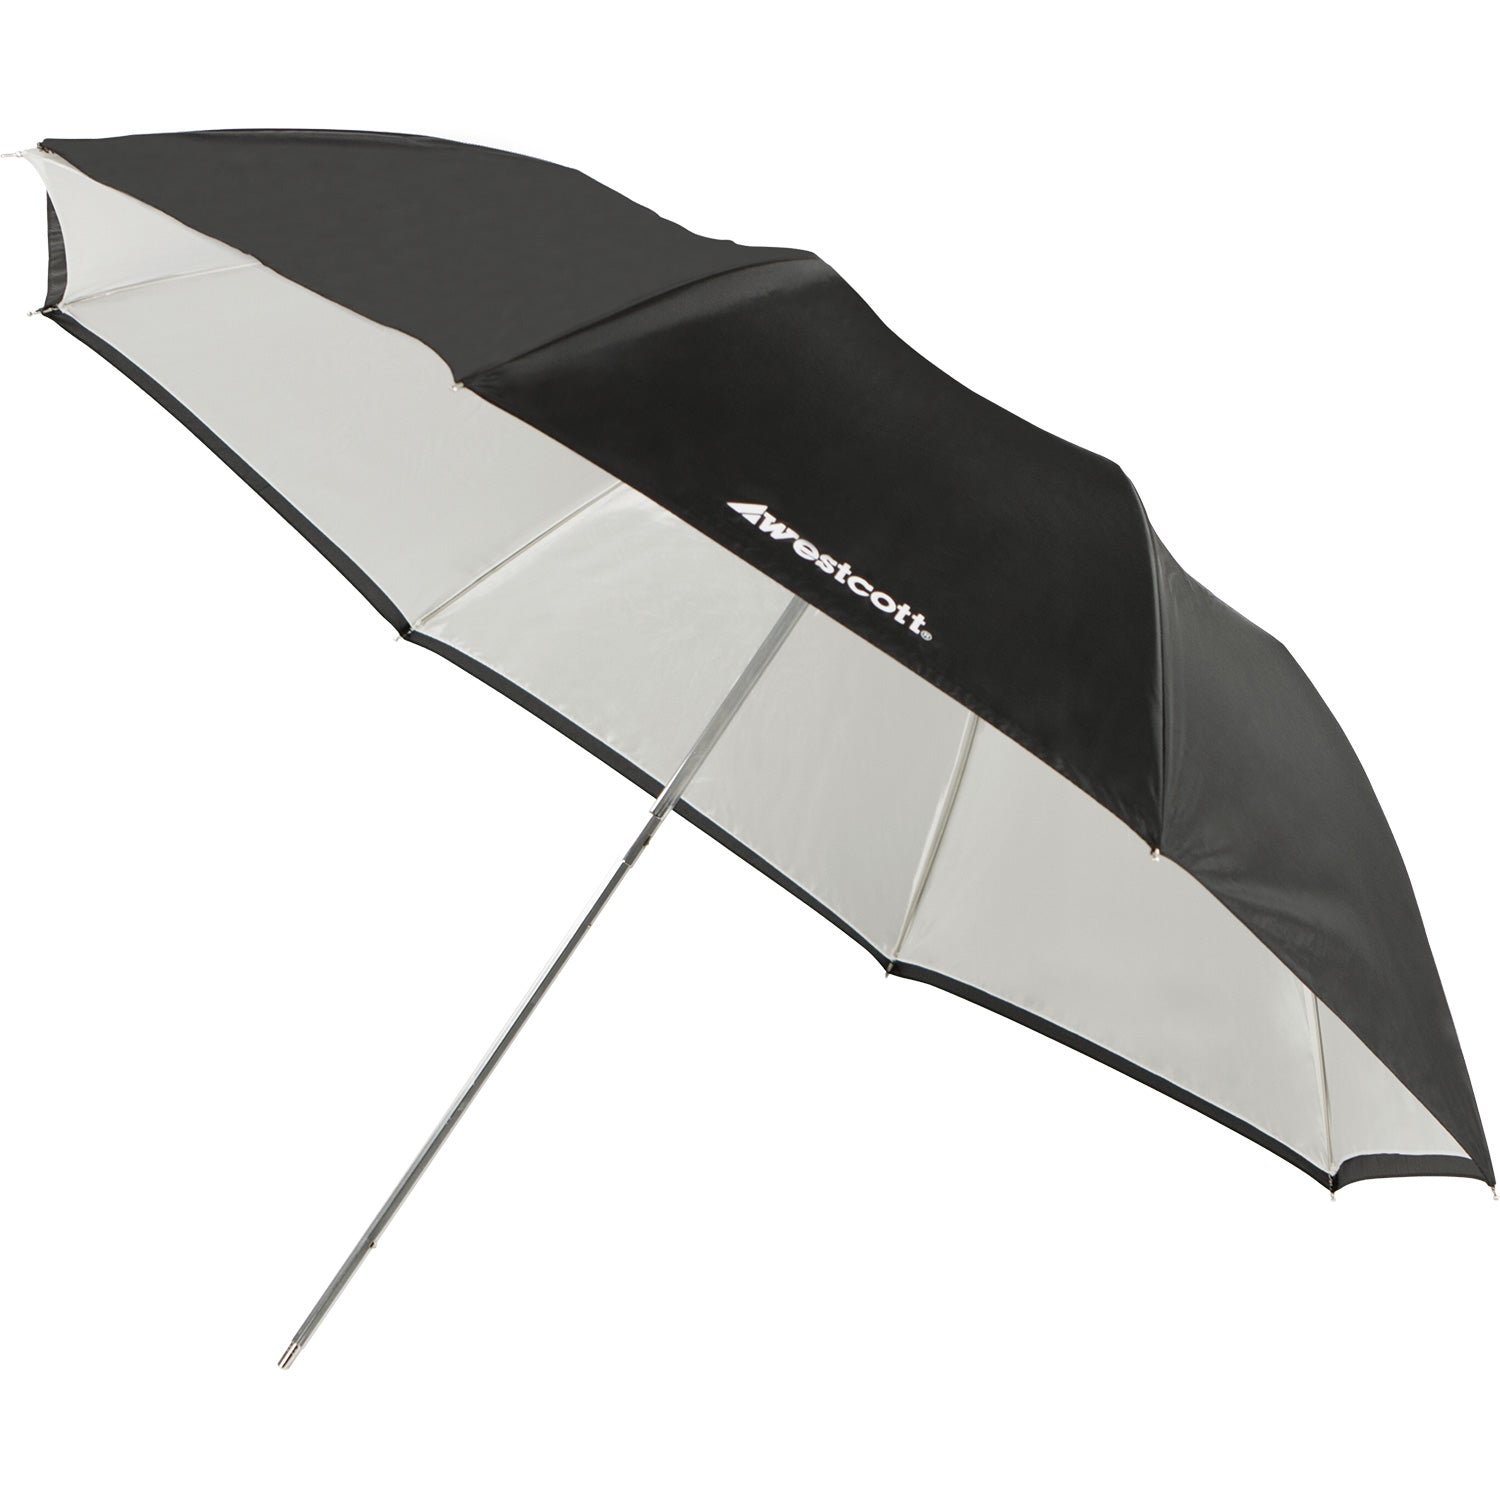 Compact Collapsible Umbrella Flash Kit - Optical White Satin with Removable Black Cover (43")